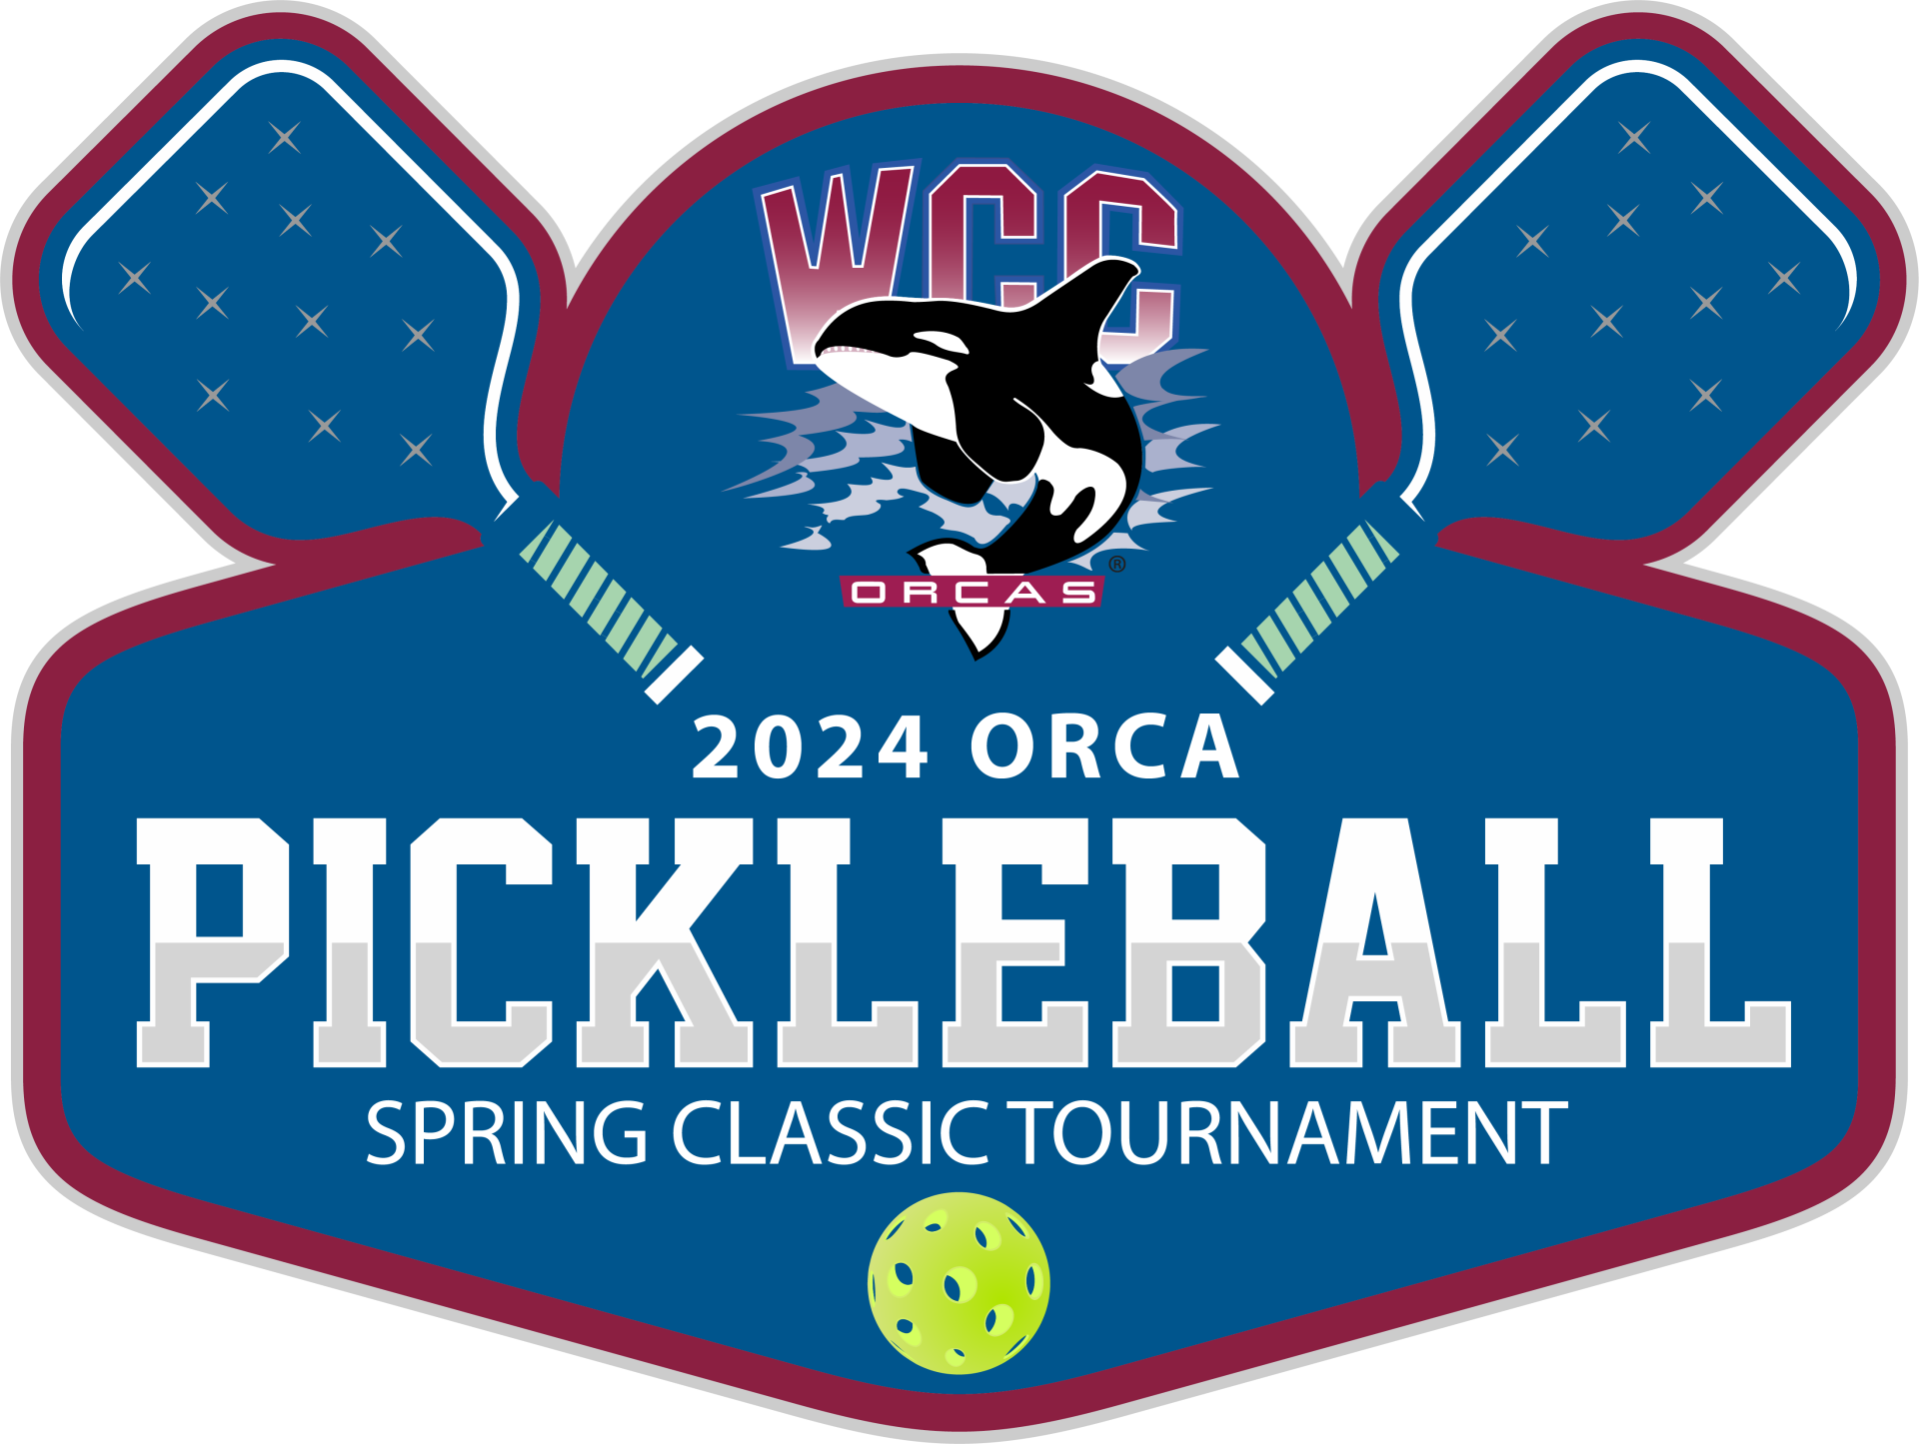 2024 Pickleball Tournament logo - blue background with Orca leaping out of water and image of a pickleball